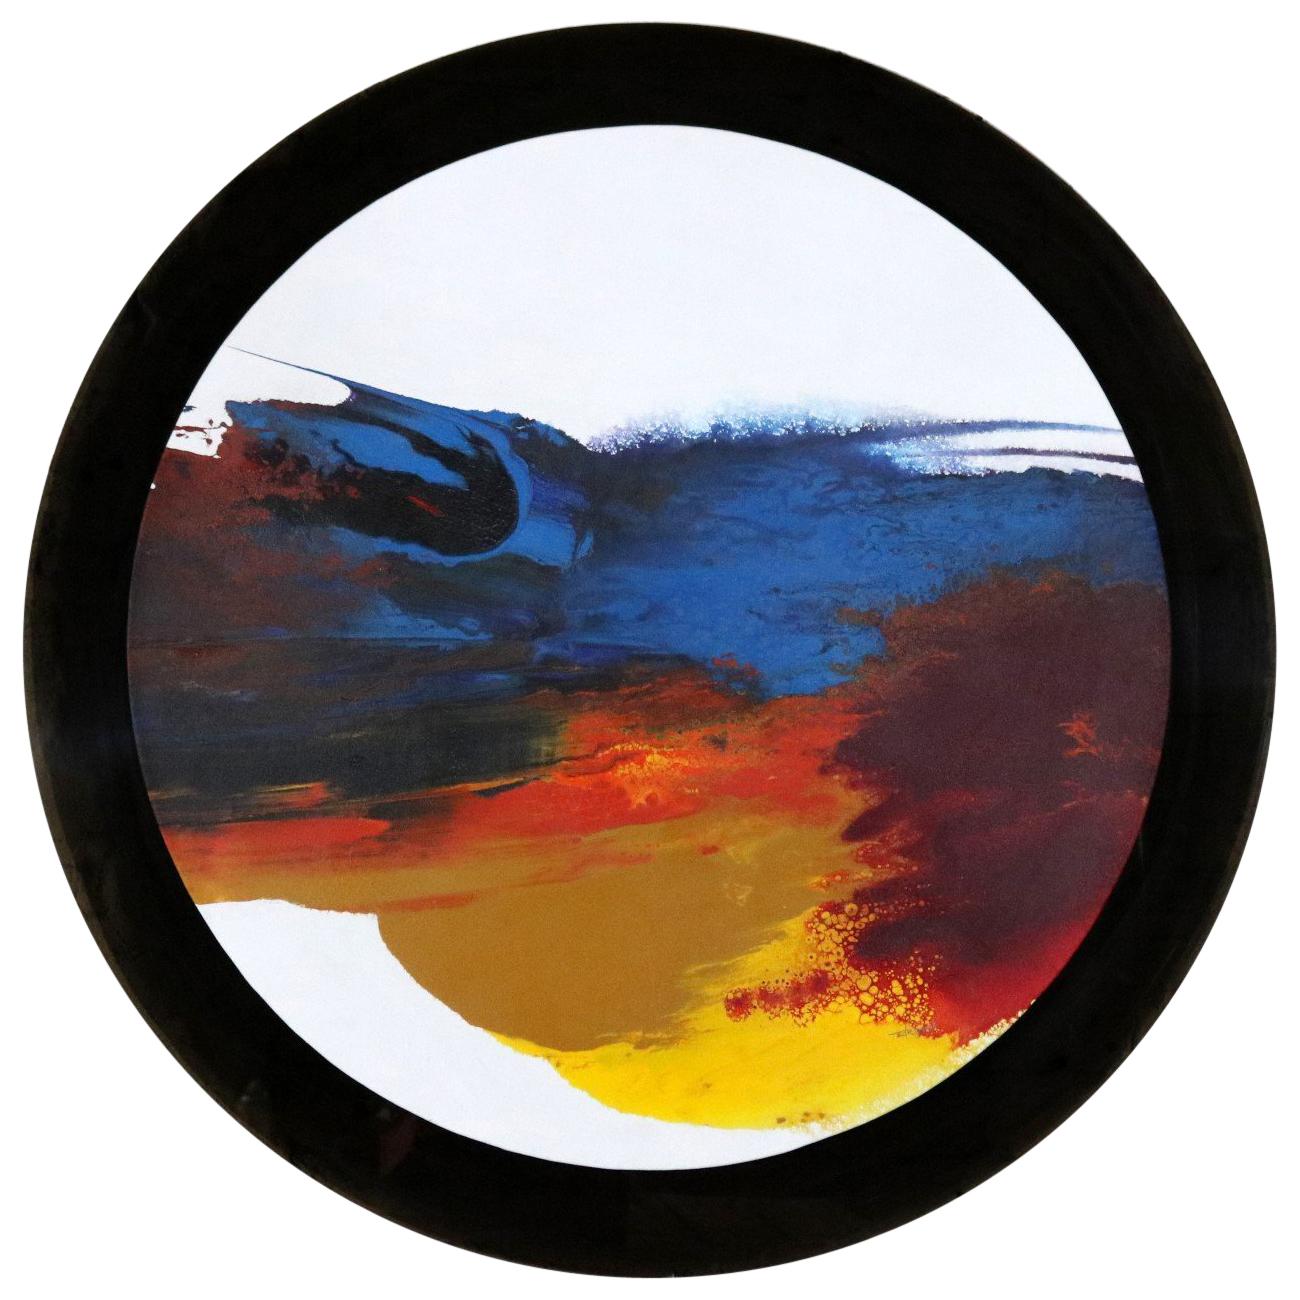 Abstract Round Acrylic Canvas Painting Mounted Smoke Plexiglass by Ted R. Lownik